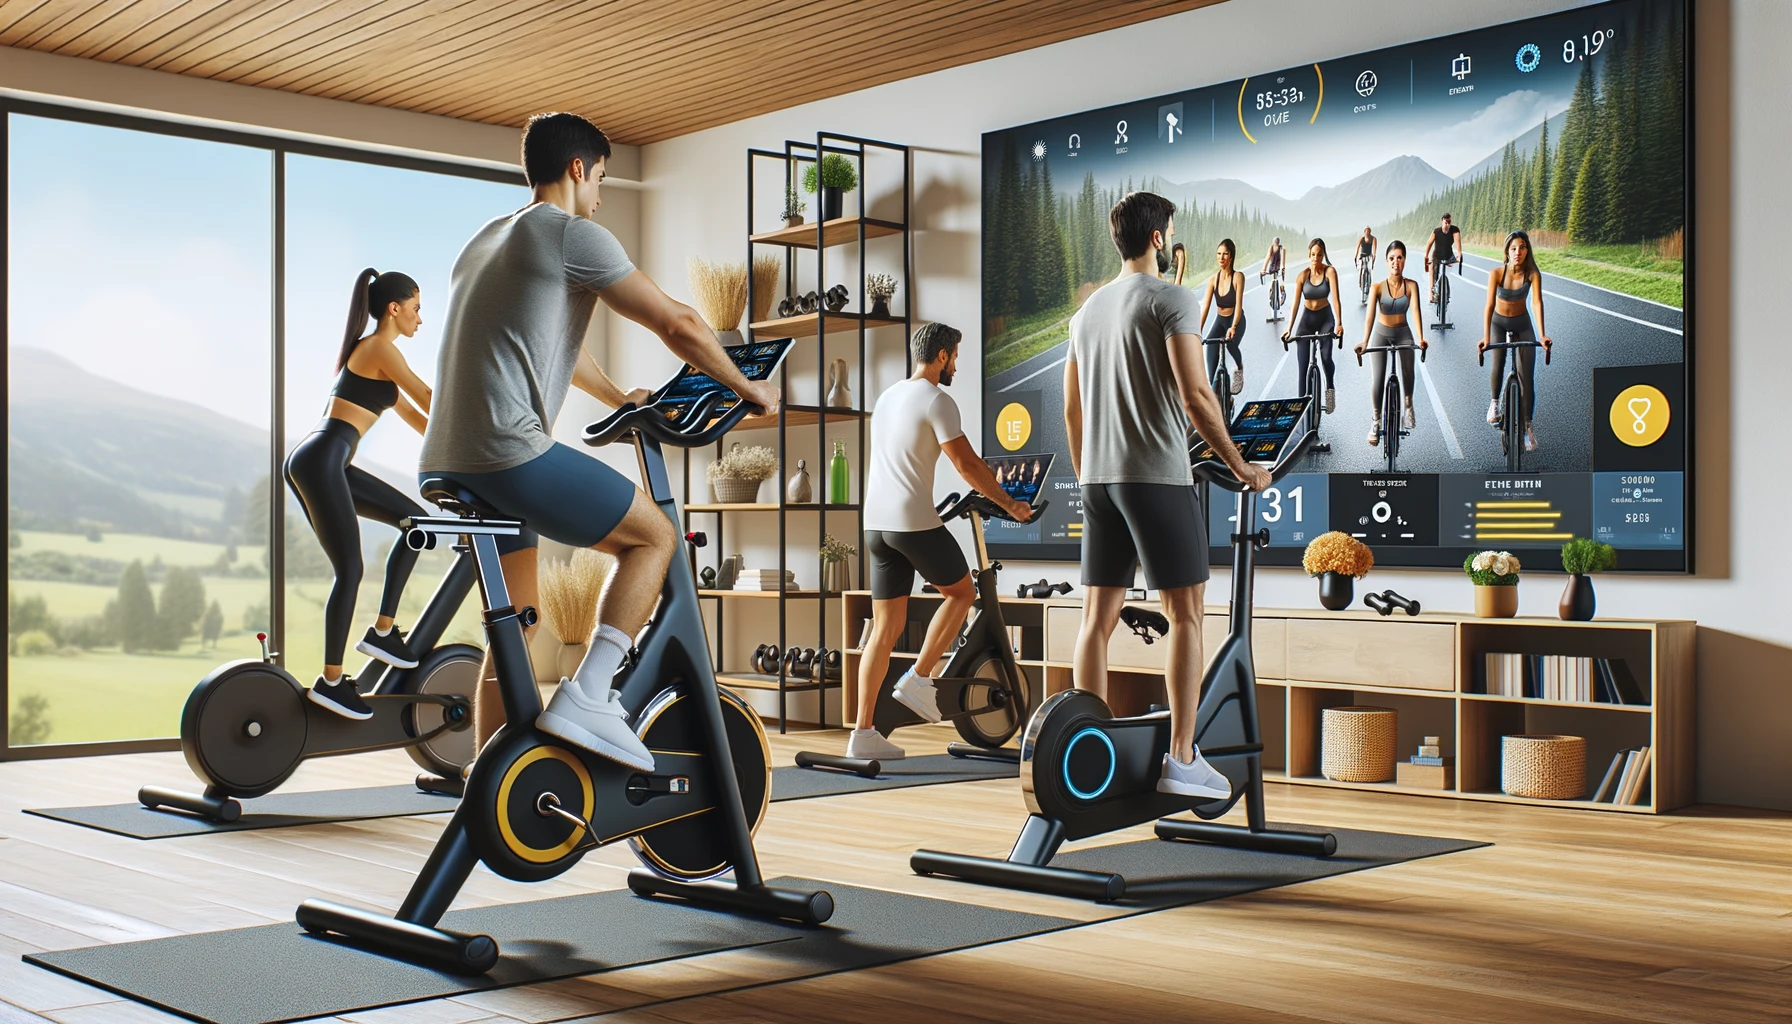 Diverse individuals in a modern home gym, engaging with high-tech fitness equipment such as a Peloton bike and virtual class.